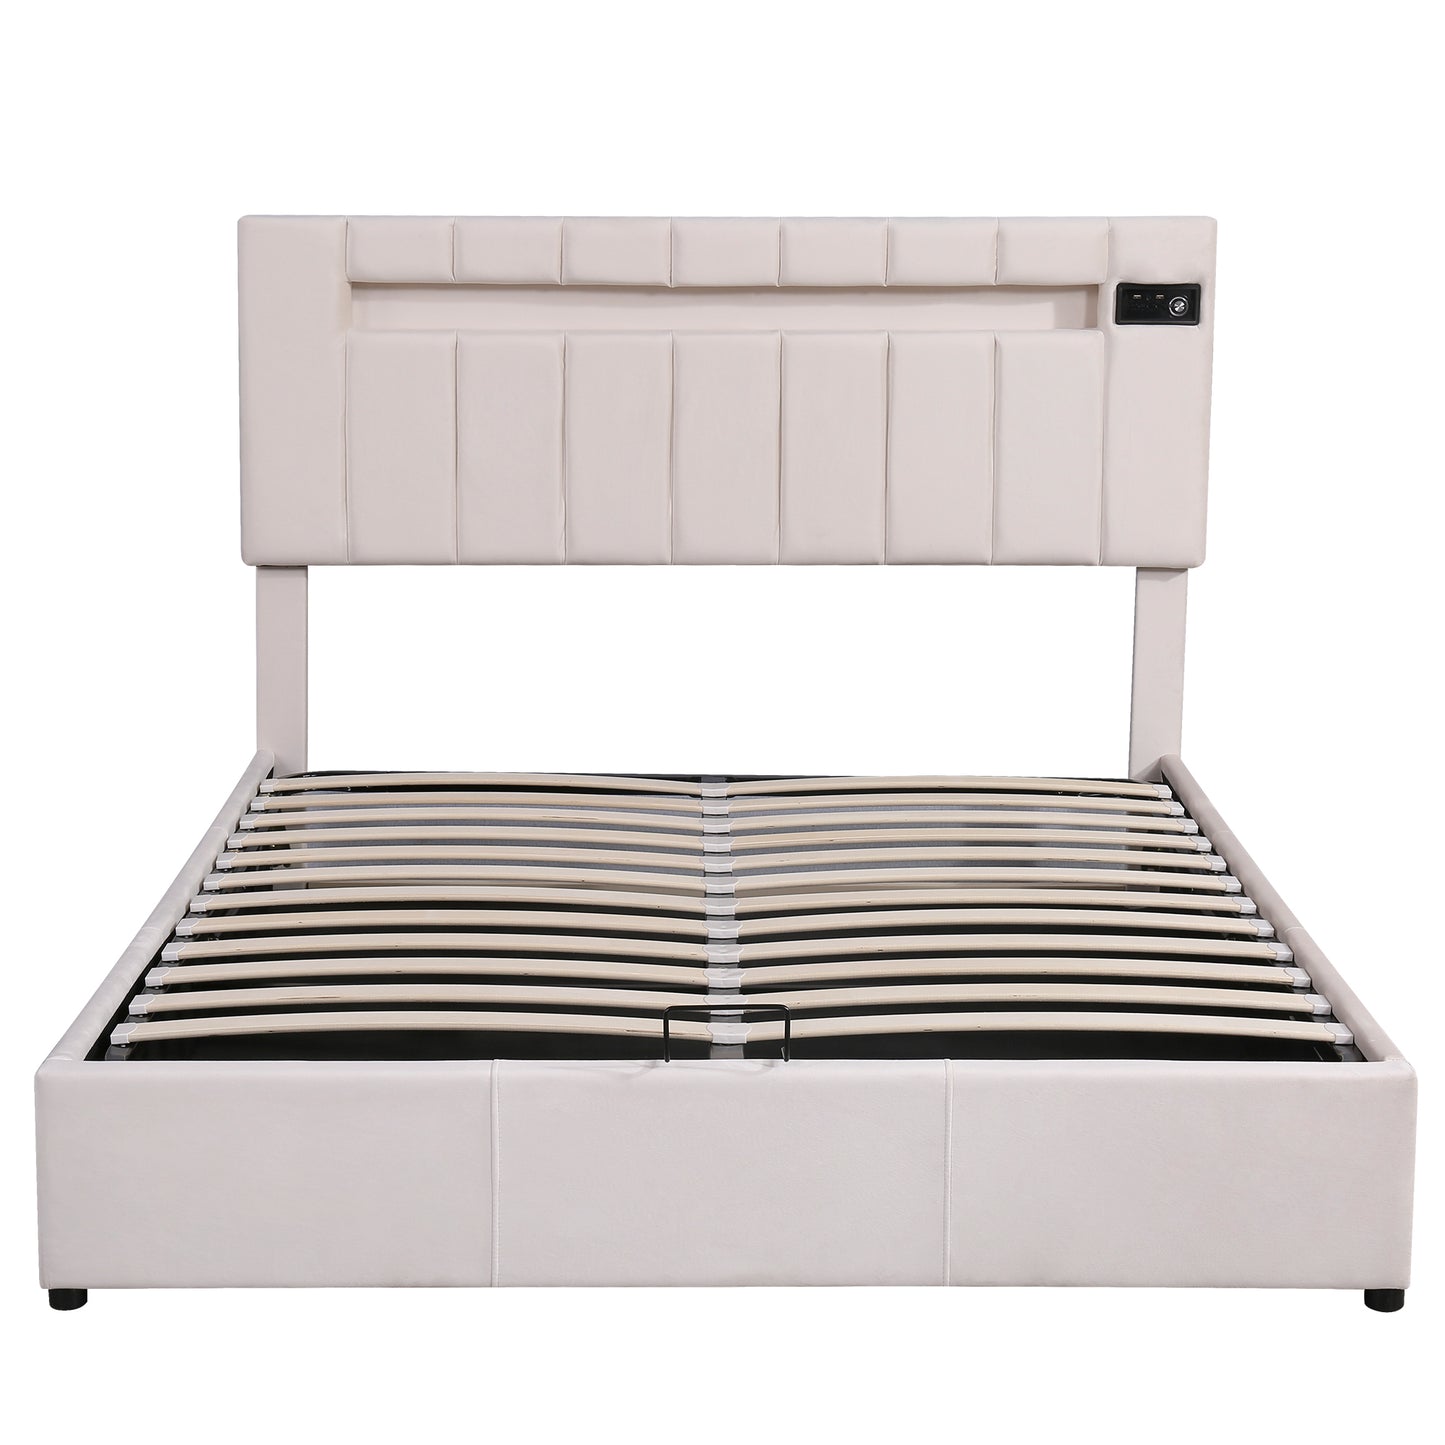 Queen Size Upholstered Platform Bed with LED light, Bluetooth Player and USB Charging, Hydraulic Storage Bed in Beige Velvet Fabric